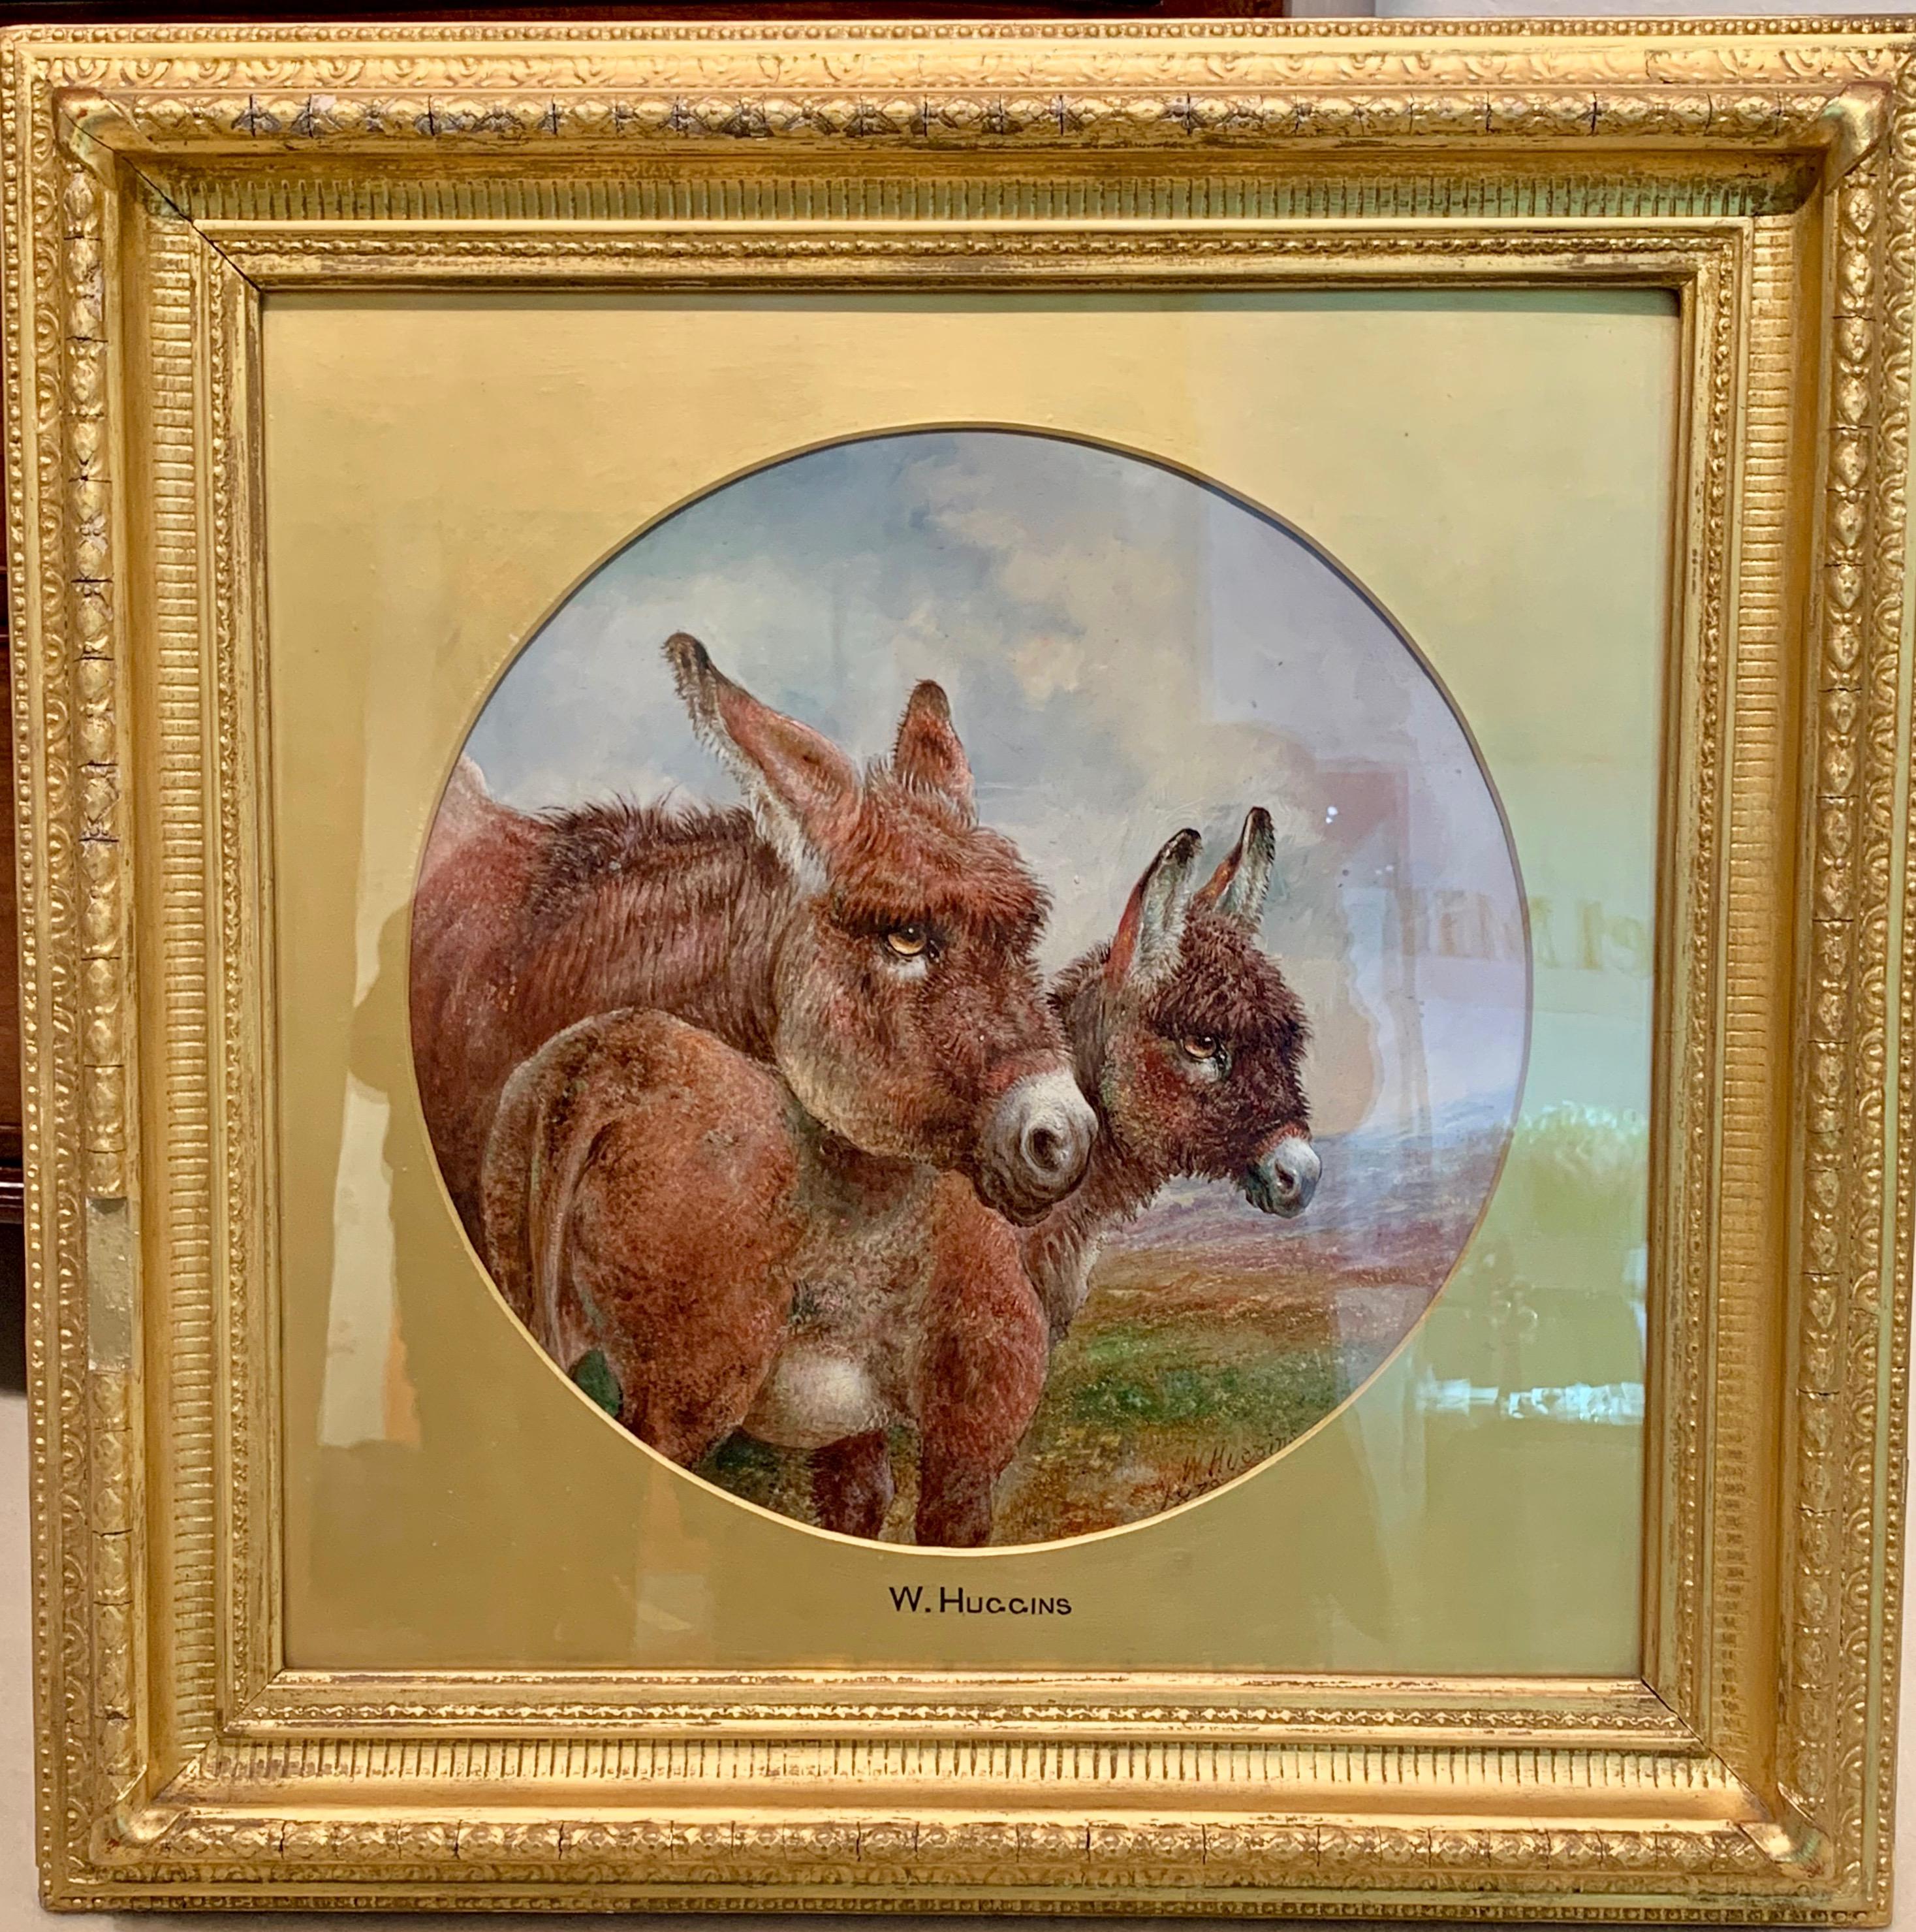 William Huggins Animal Painting - 19th century Victorian Mother Donkey with her foal